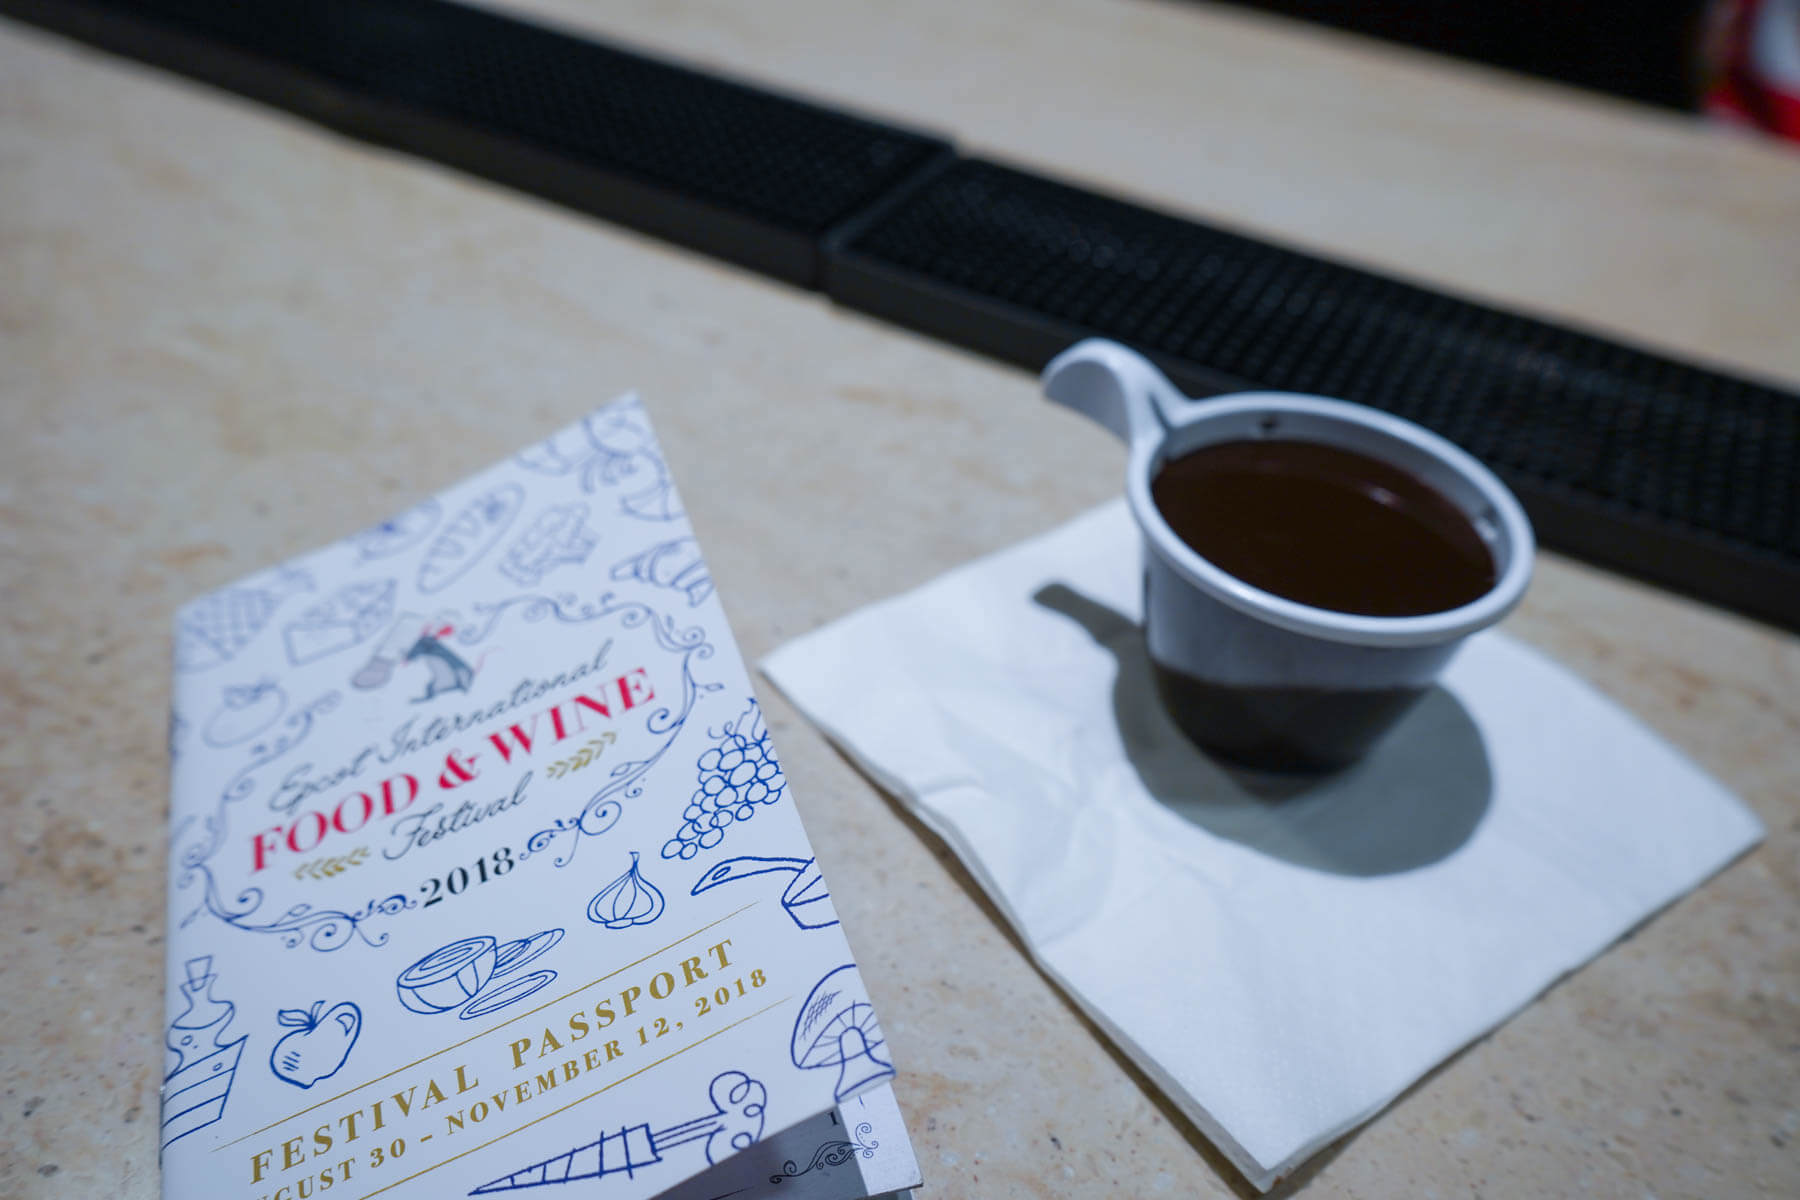 Ghiradelli's Sipping Chocolate from The Chocolate Experience - Epcot Food and Wine Festival